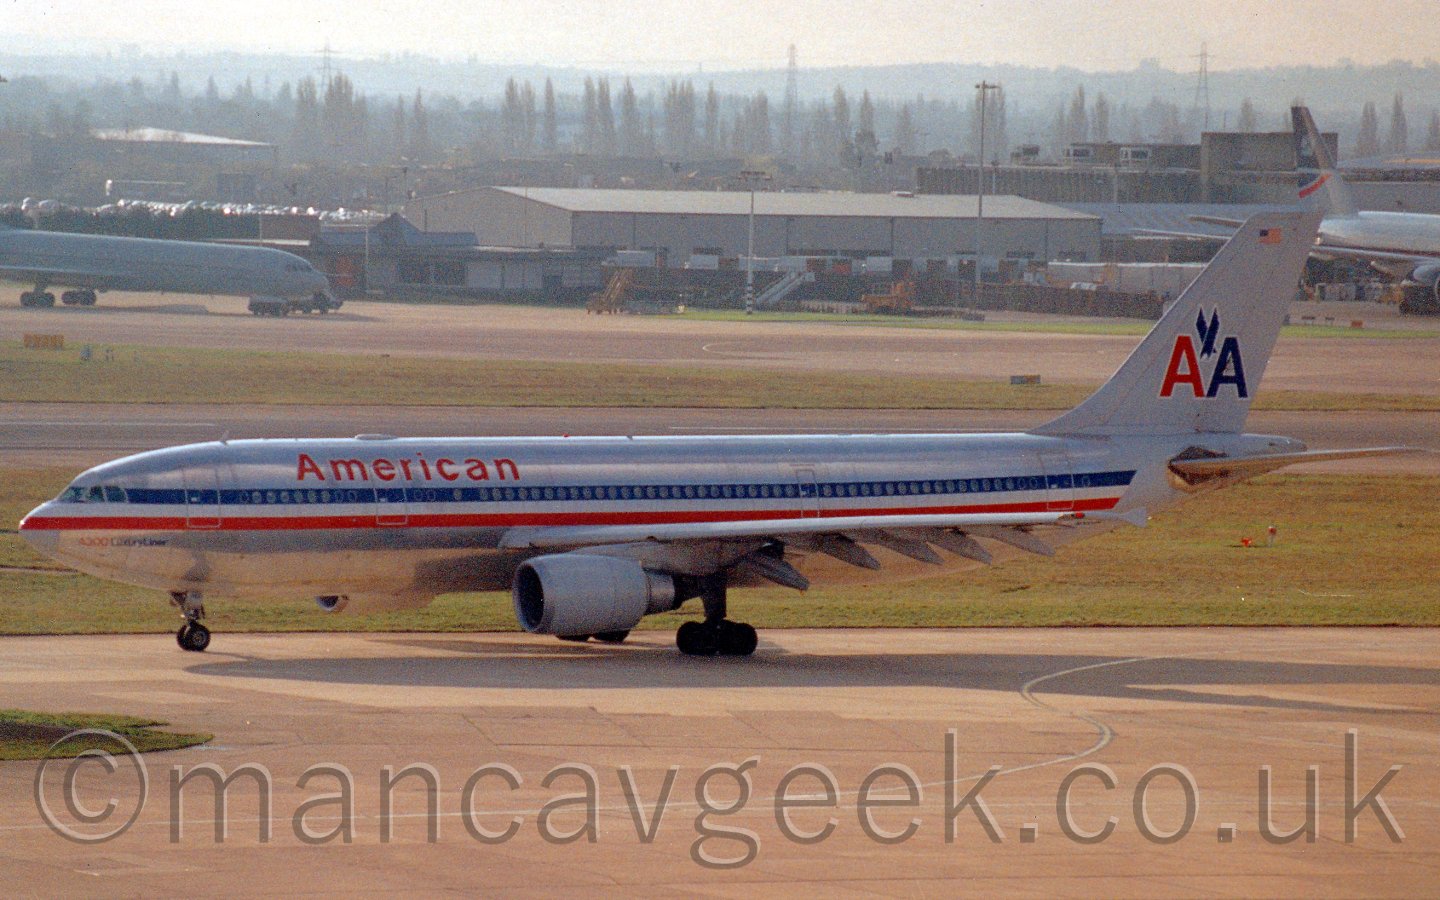 Side view of a twin engined jet airliner taxiing from right to left. The planes body is in a natural metal finish, with a blue, white, and red stripe running from nose to tail, and red "American" titles on the upper forward fuselage. There are a pair of capital letter "A"s, one red, the other blue, on the tail, with an image of a stpooping eagle between them. In the background, various large building line the airfield, with a pair of planes, in front of them, one plane on each side of the frame, both facing to the lower right corner. Threes are visible through the haze in the distance. The overall scene is a bit hazy and grainy, but with some strong sunlight from the left, with bright speckles on this planes forward fuselage, and a strong shadow on the ground.